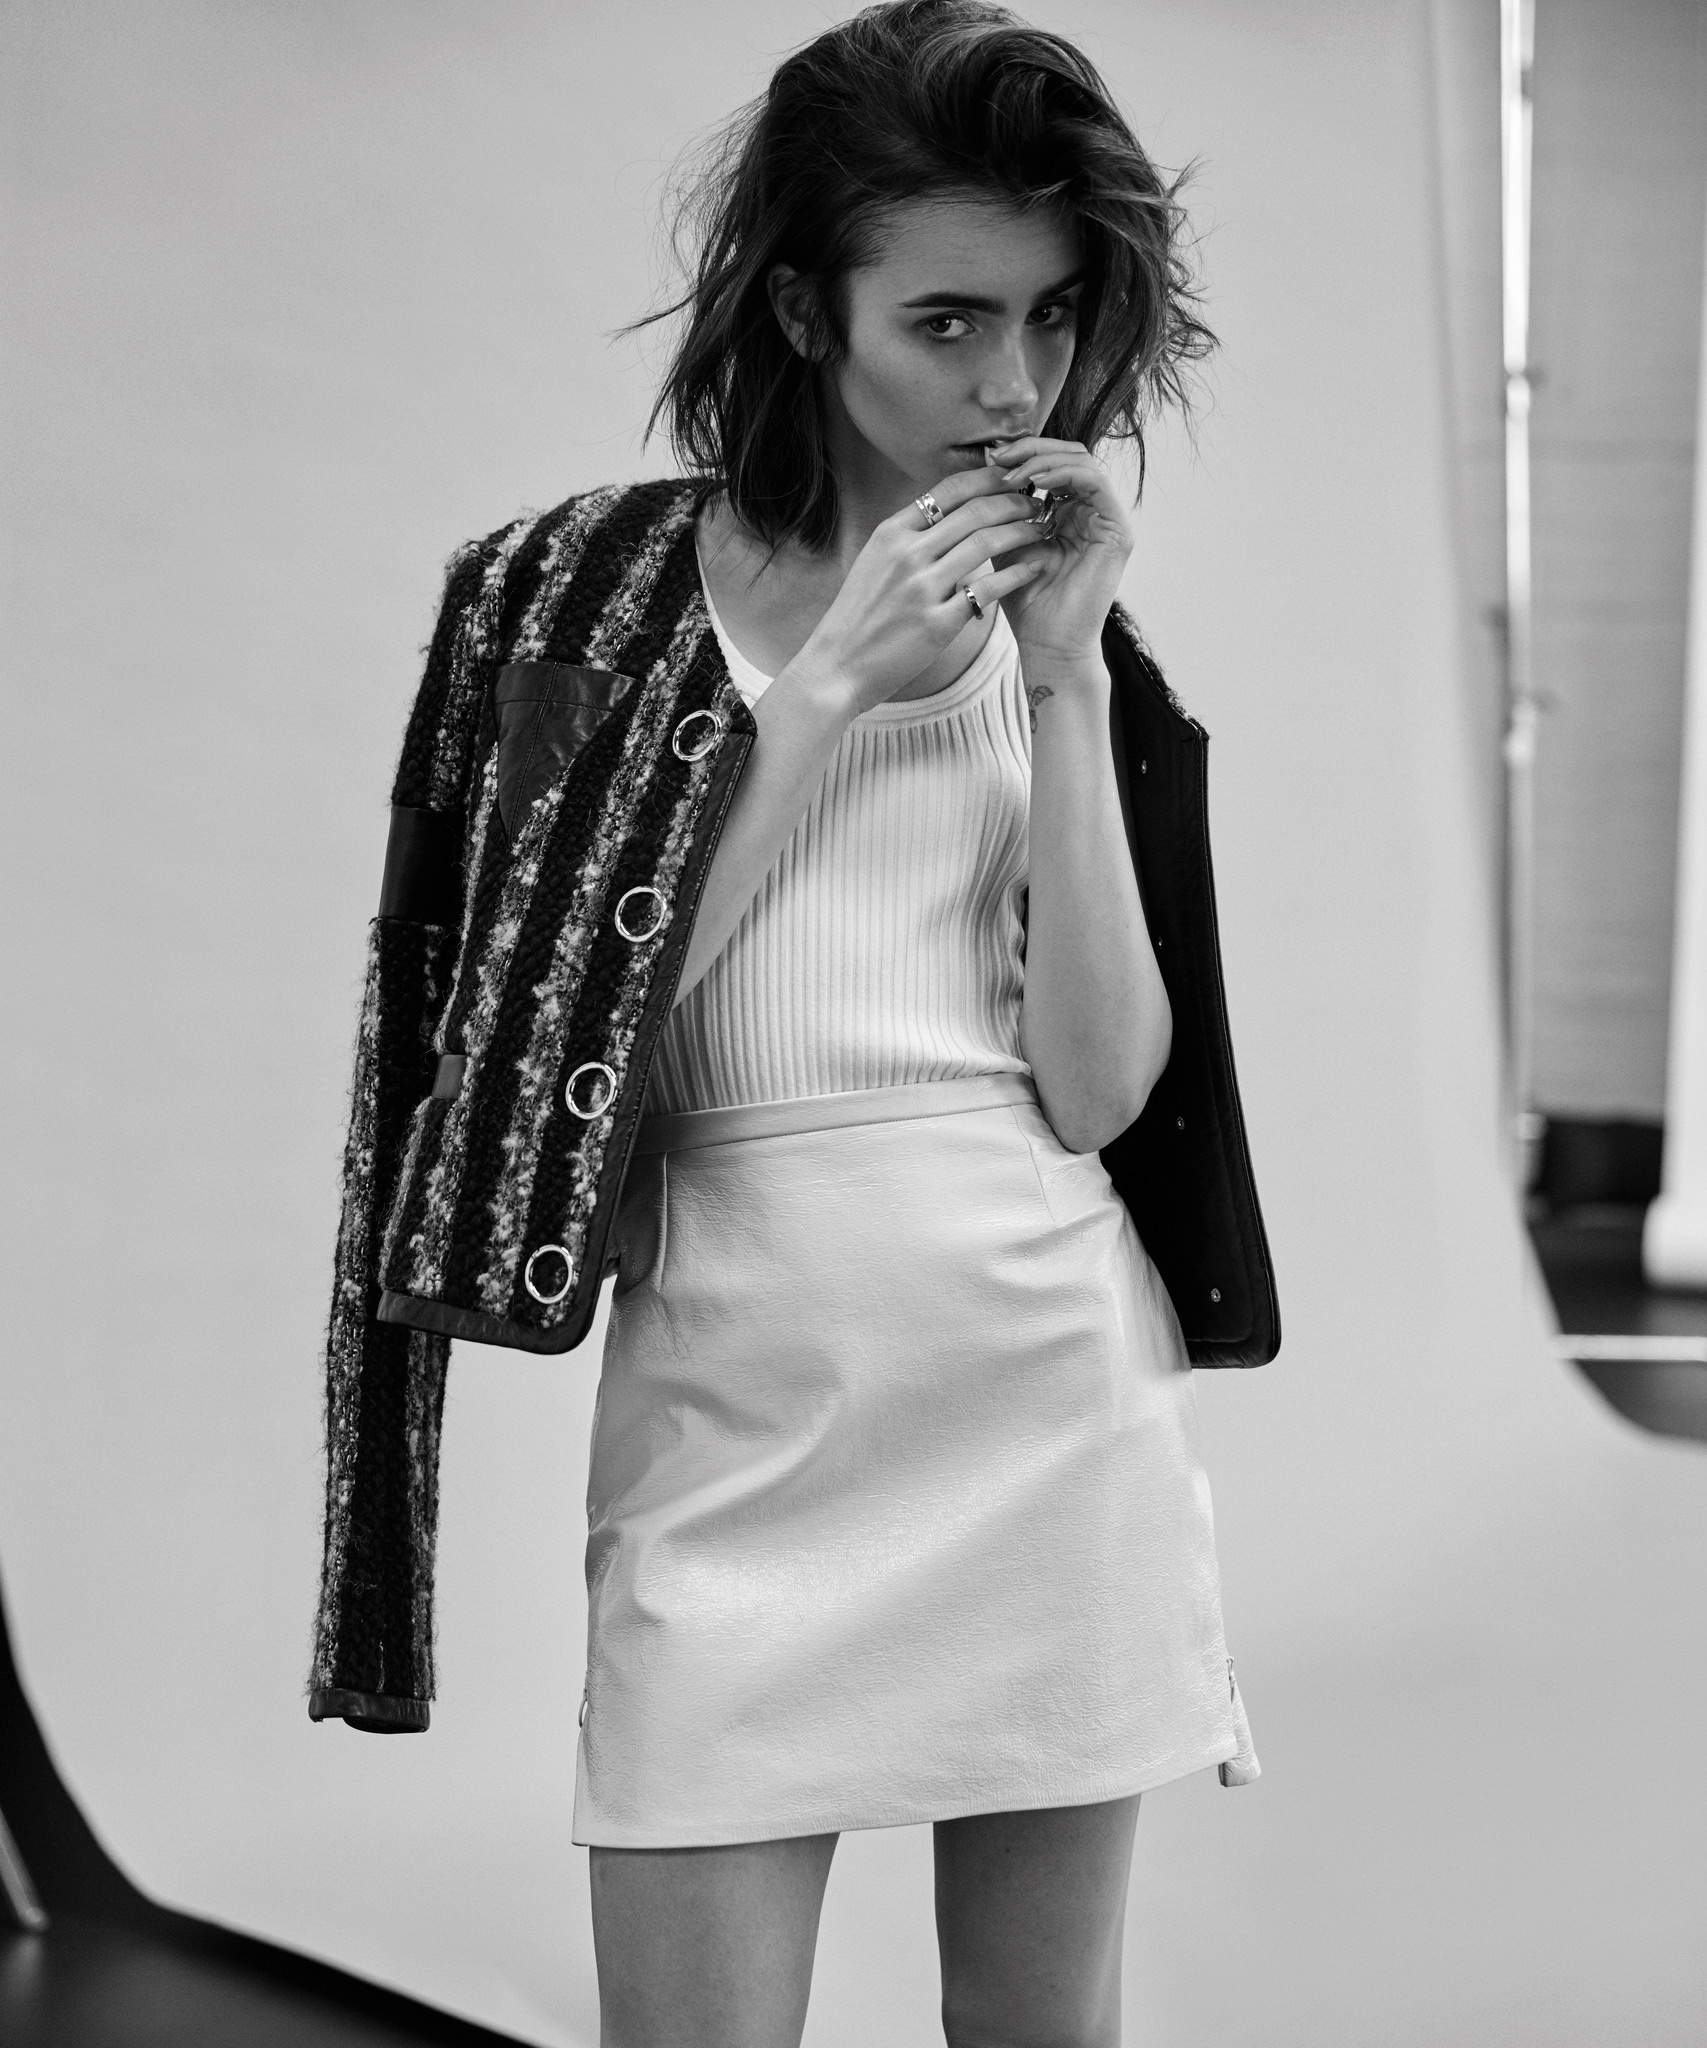 Lily Collins photo 903 of 2540 pics, wallpaper - photo #896424 - ThePlace2